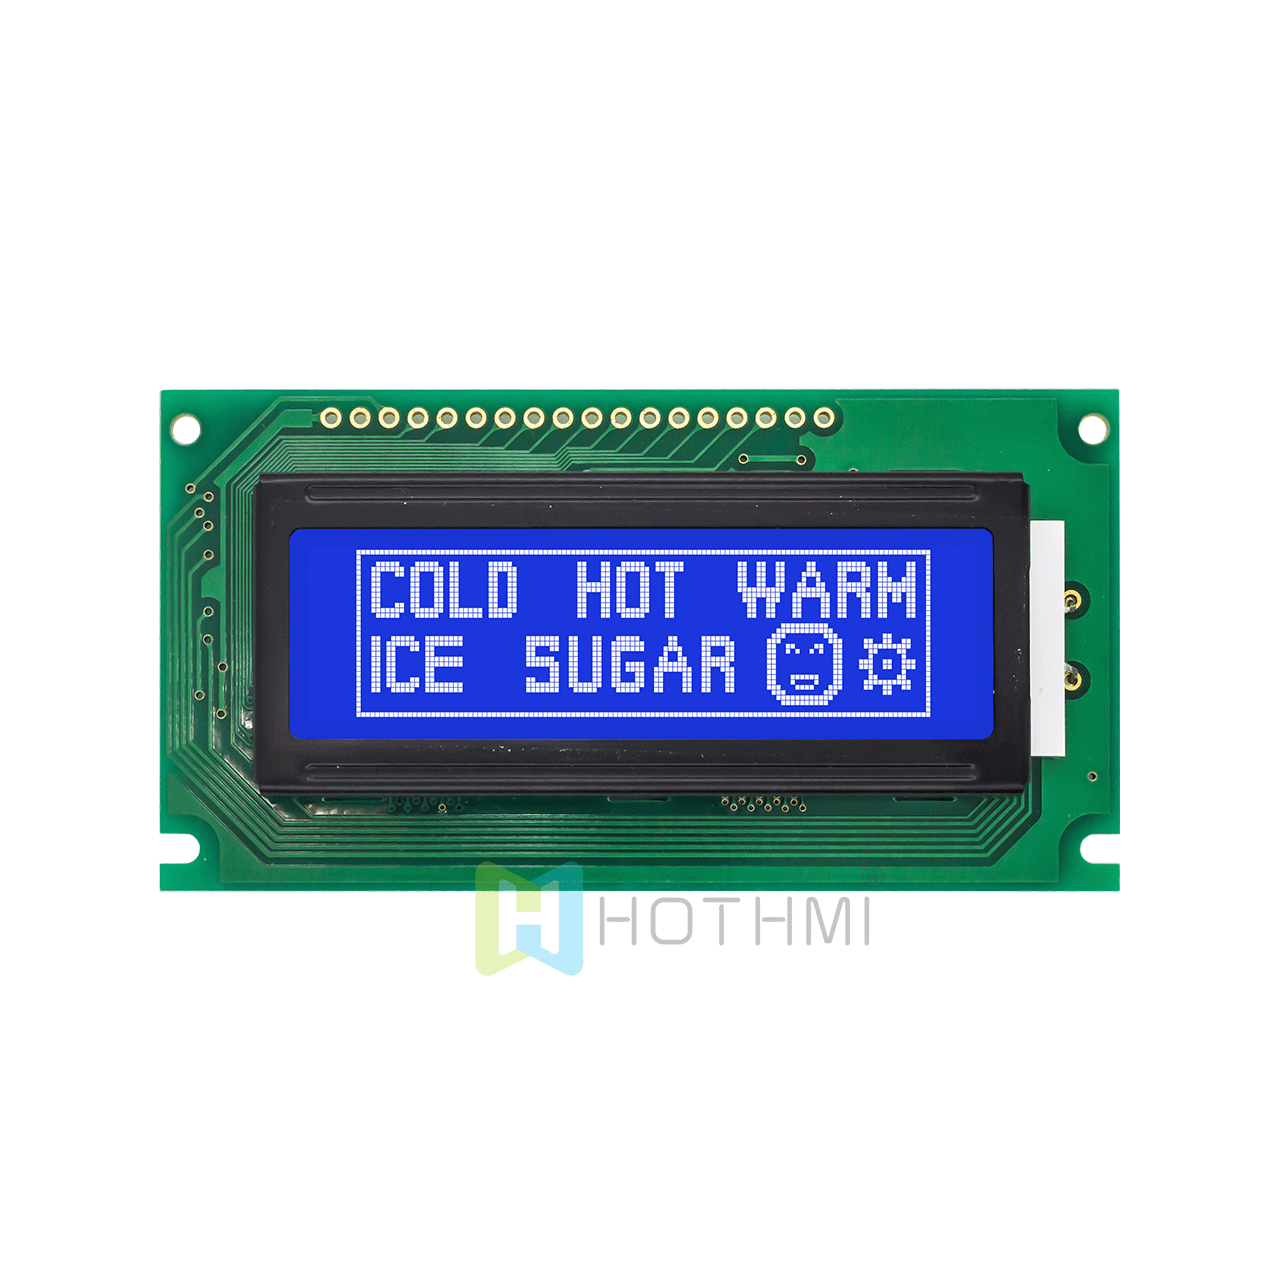 2.5"5.0v | 122X32 monochrome graphic LCD display | STN (—) display with white side backlight | Adruino